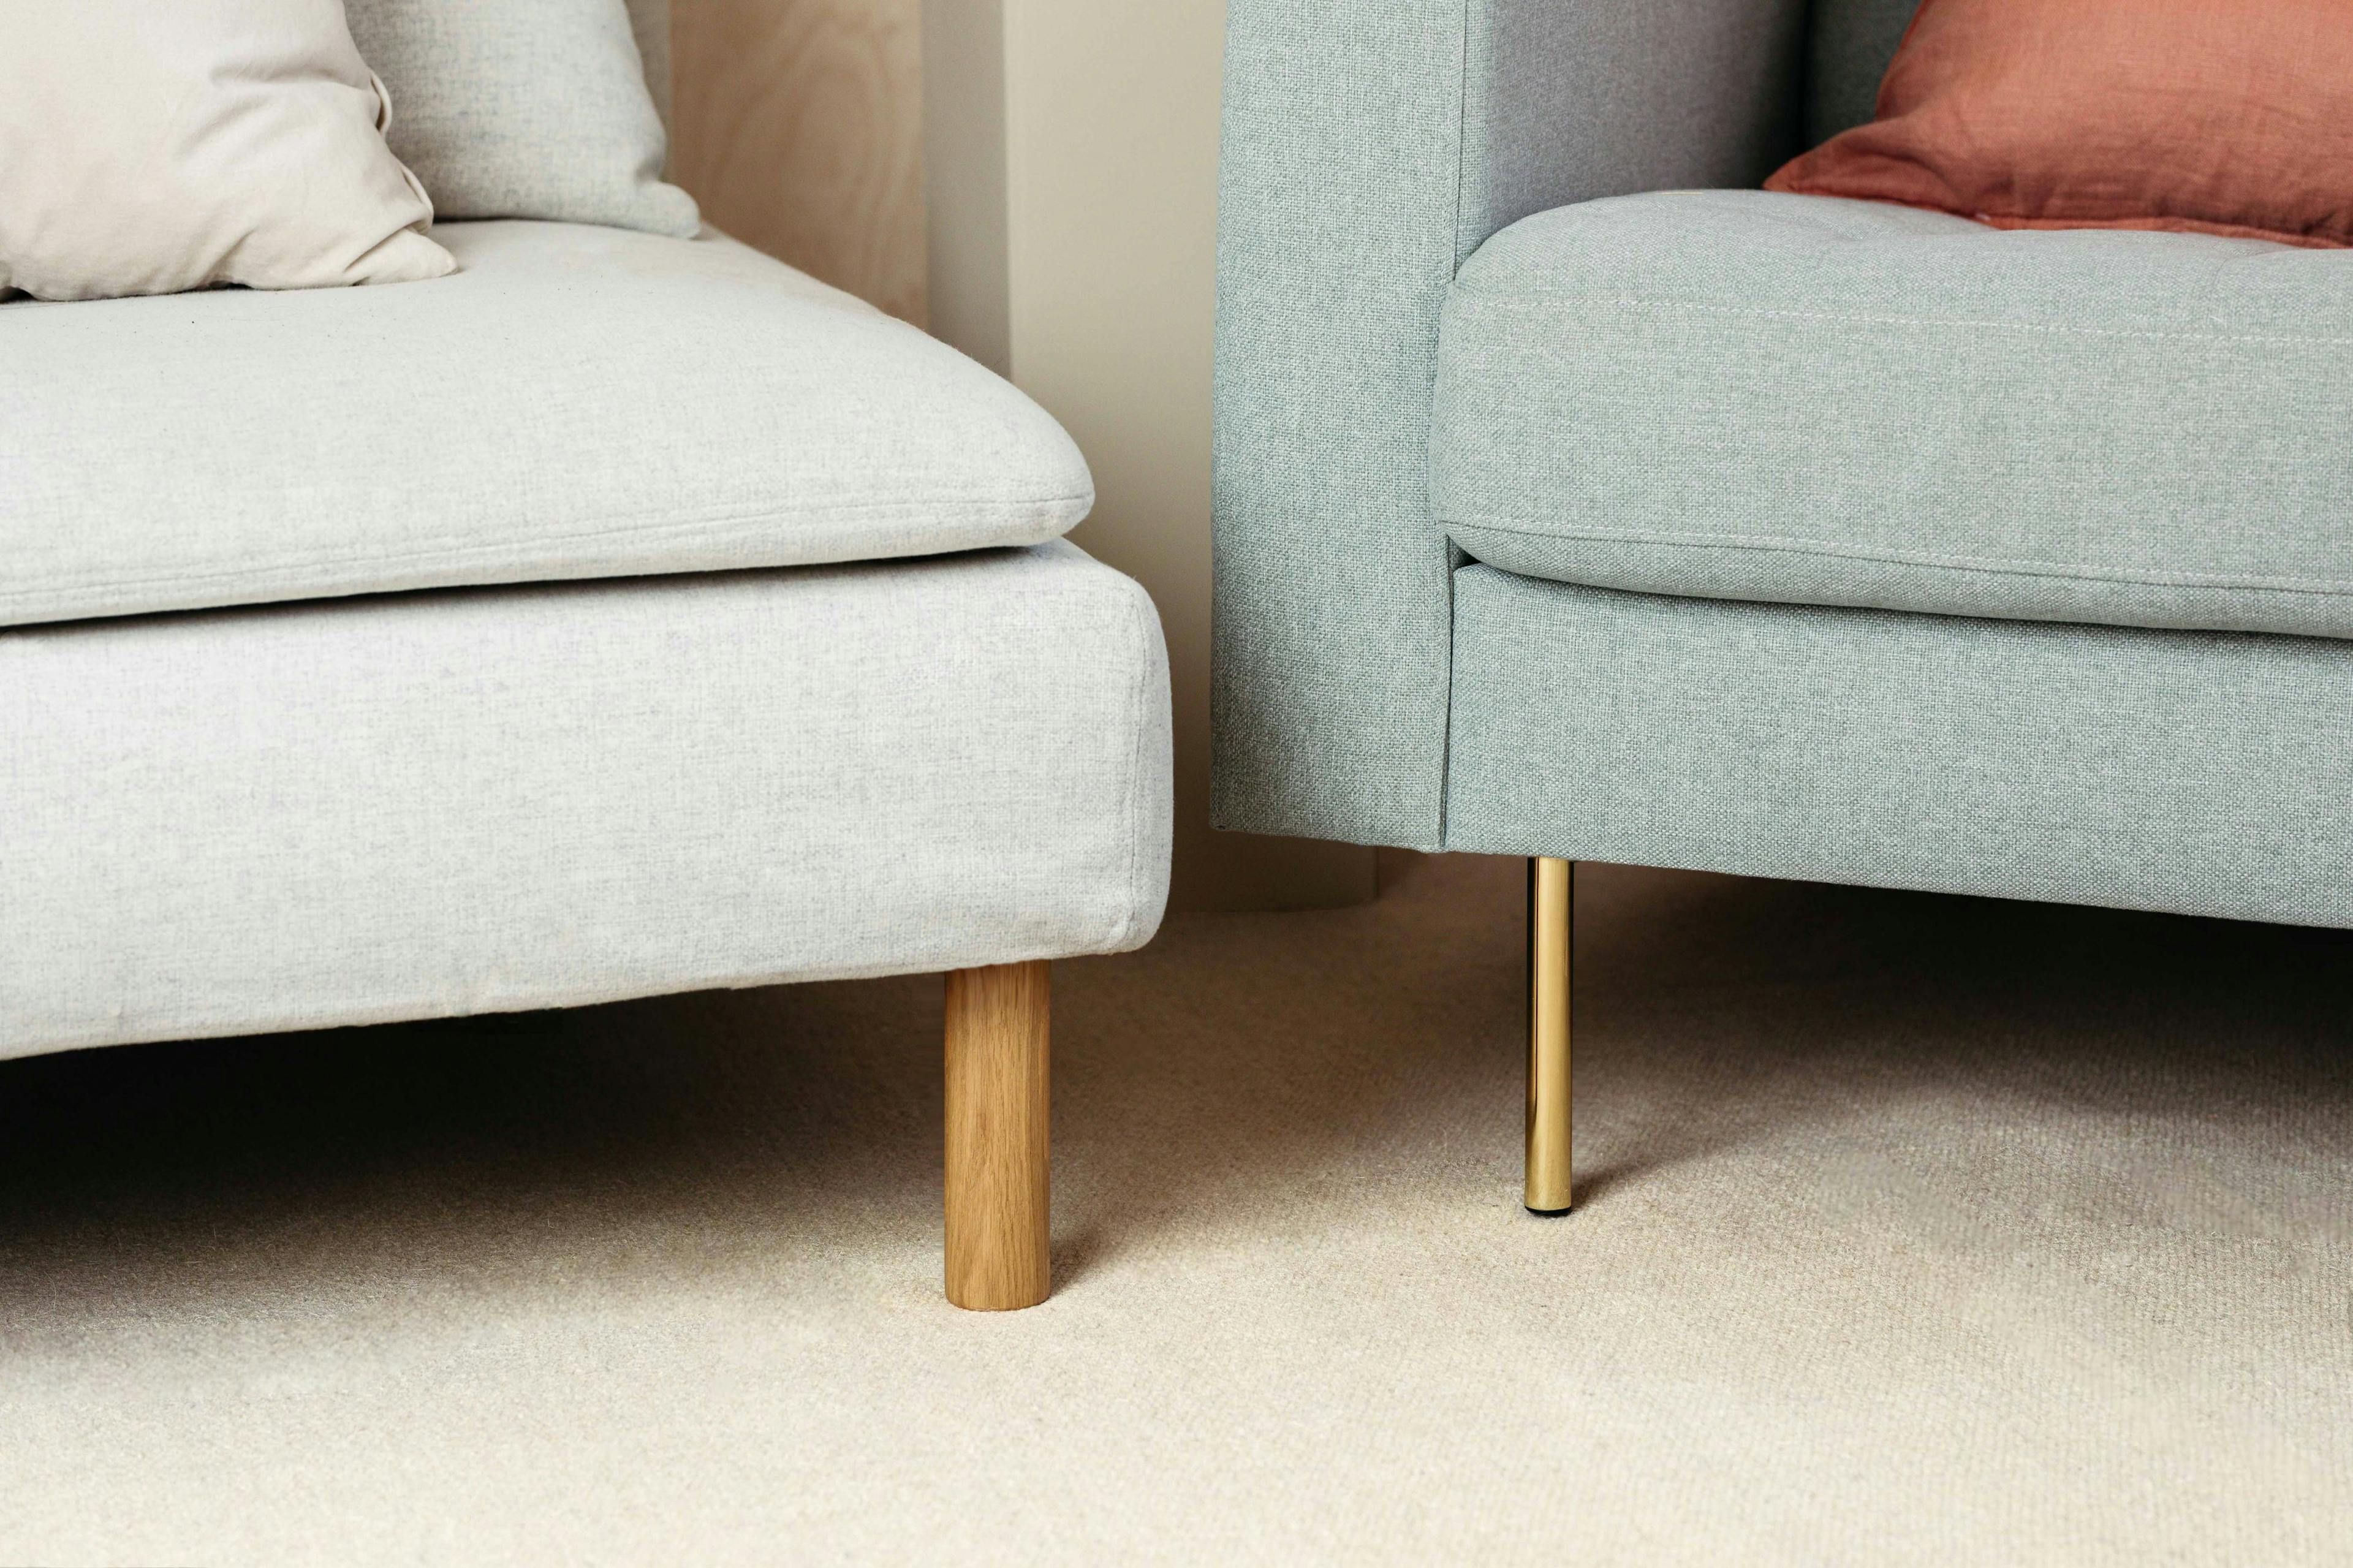 Replacement Chair Legs